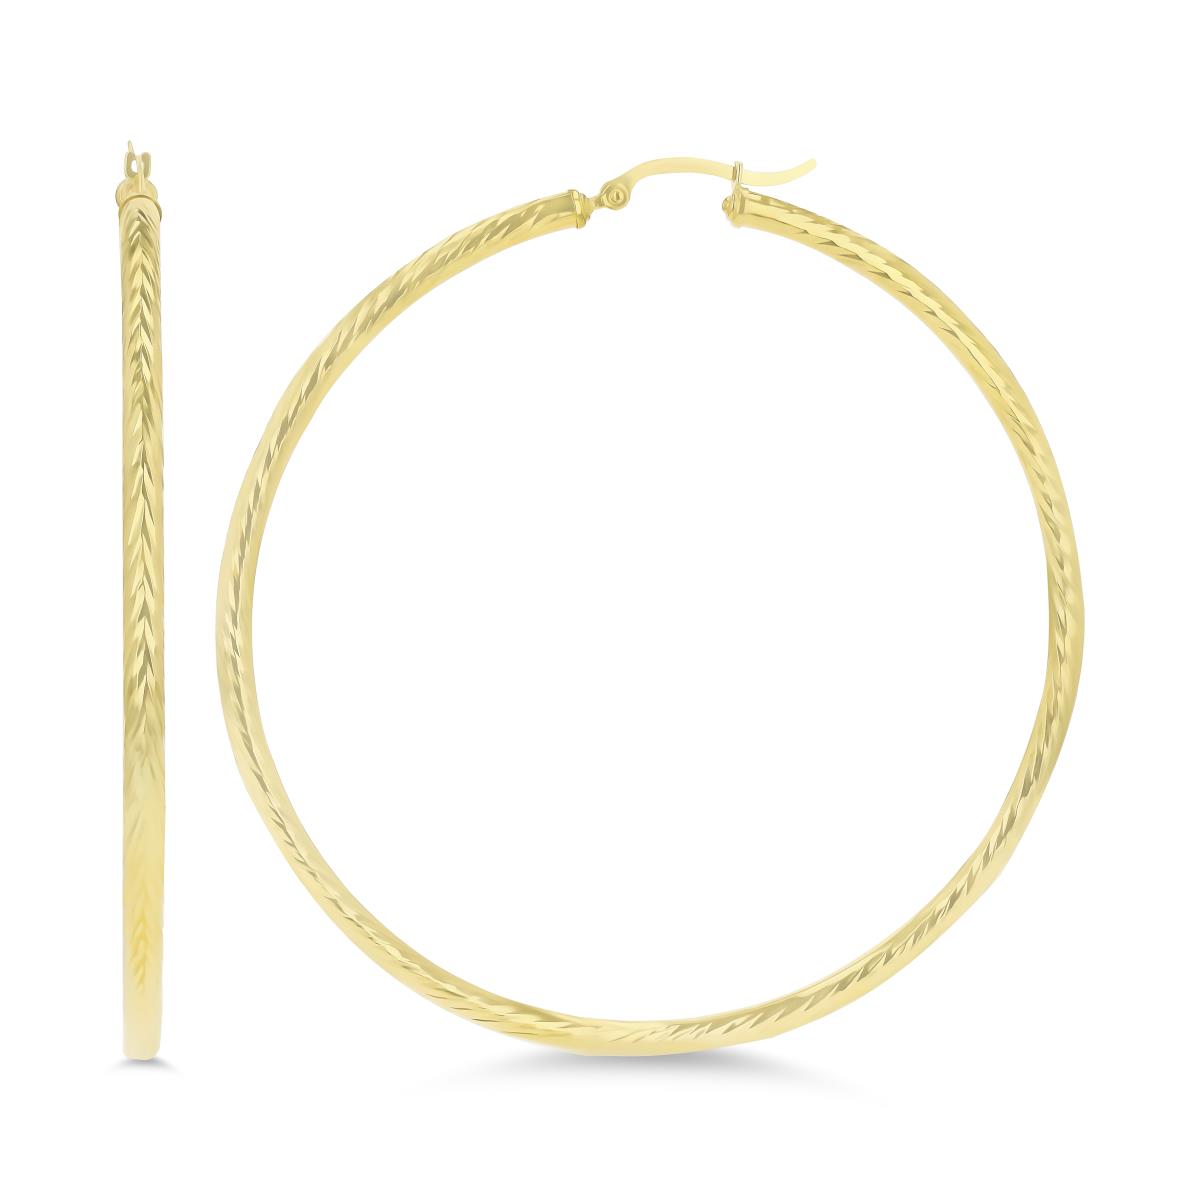 14K Yellow Gold 70x3mm (2.75") Twisted DC Hoop Earring